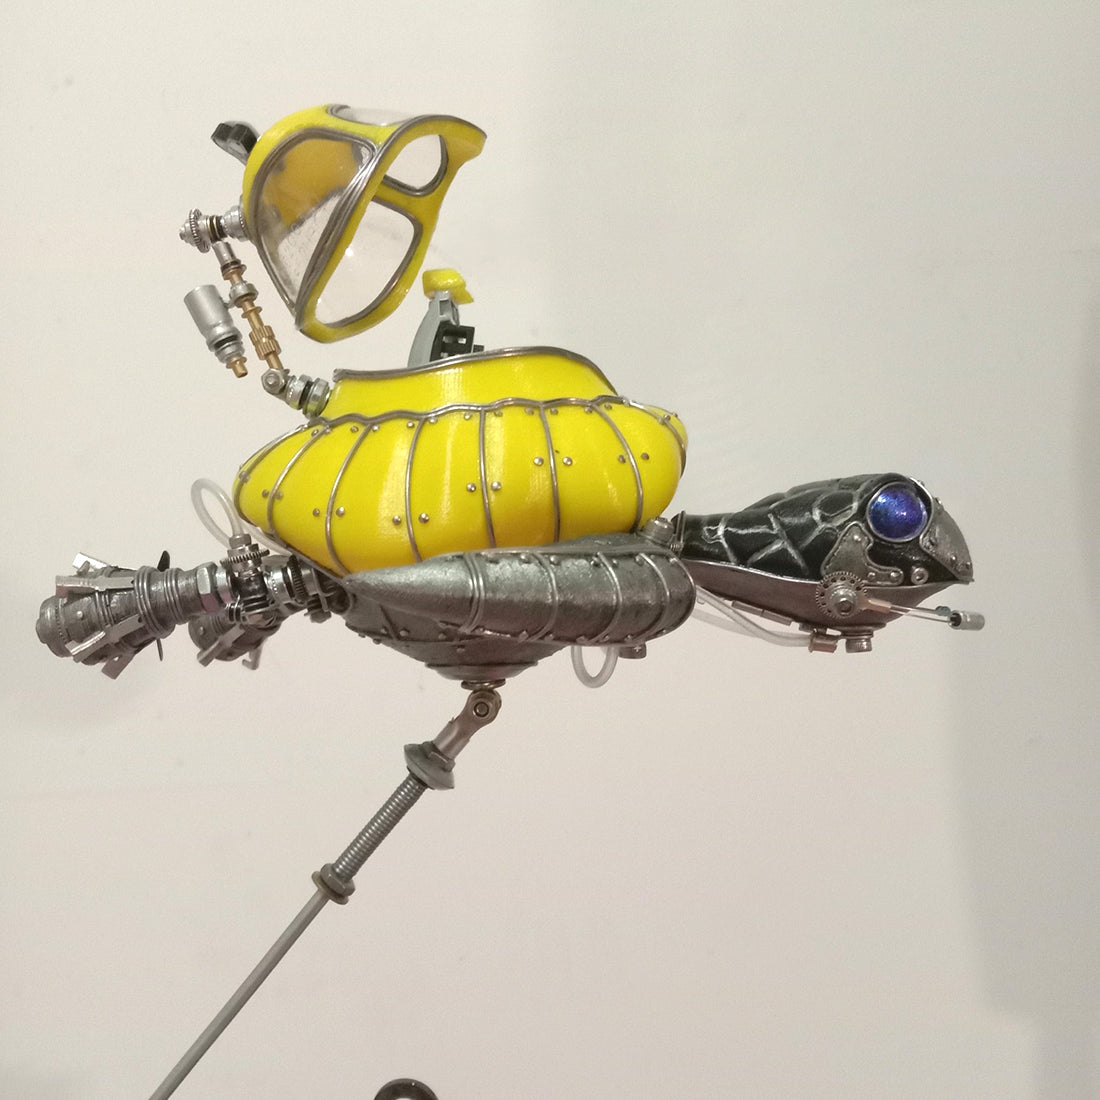 DIY Mechanical Metal Turtle Taxi Steampunk Sculpture Animal  Assembled Model Kits with Light